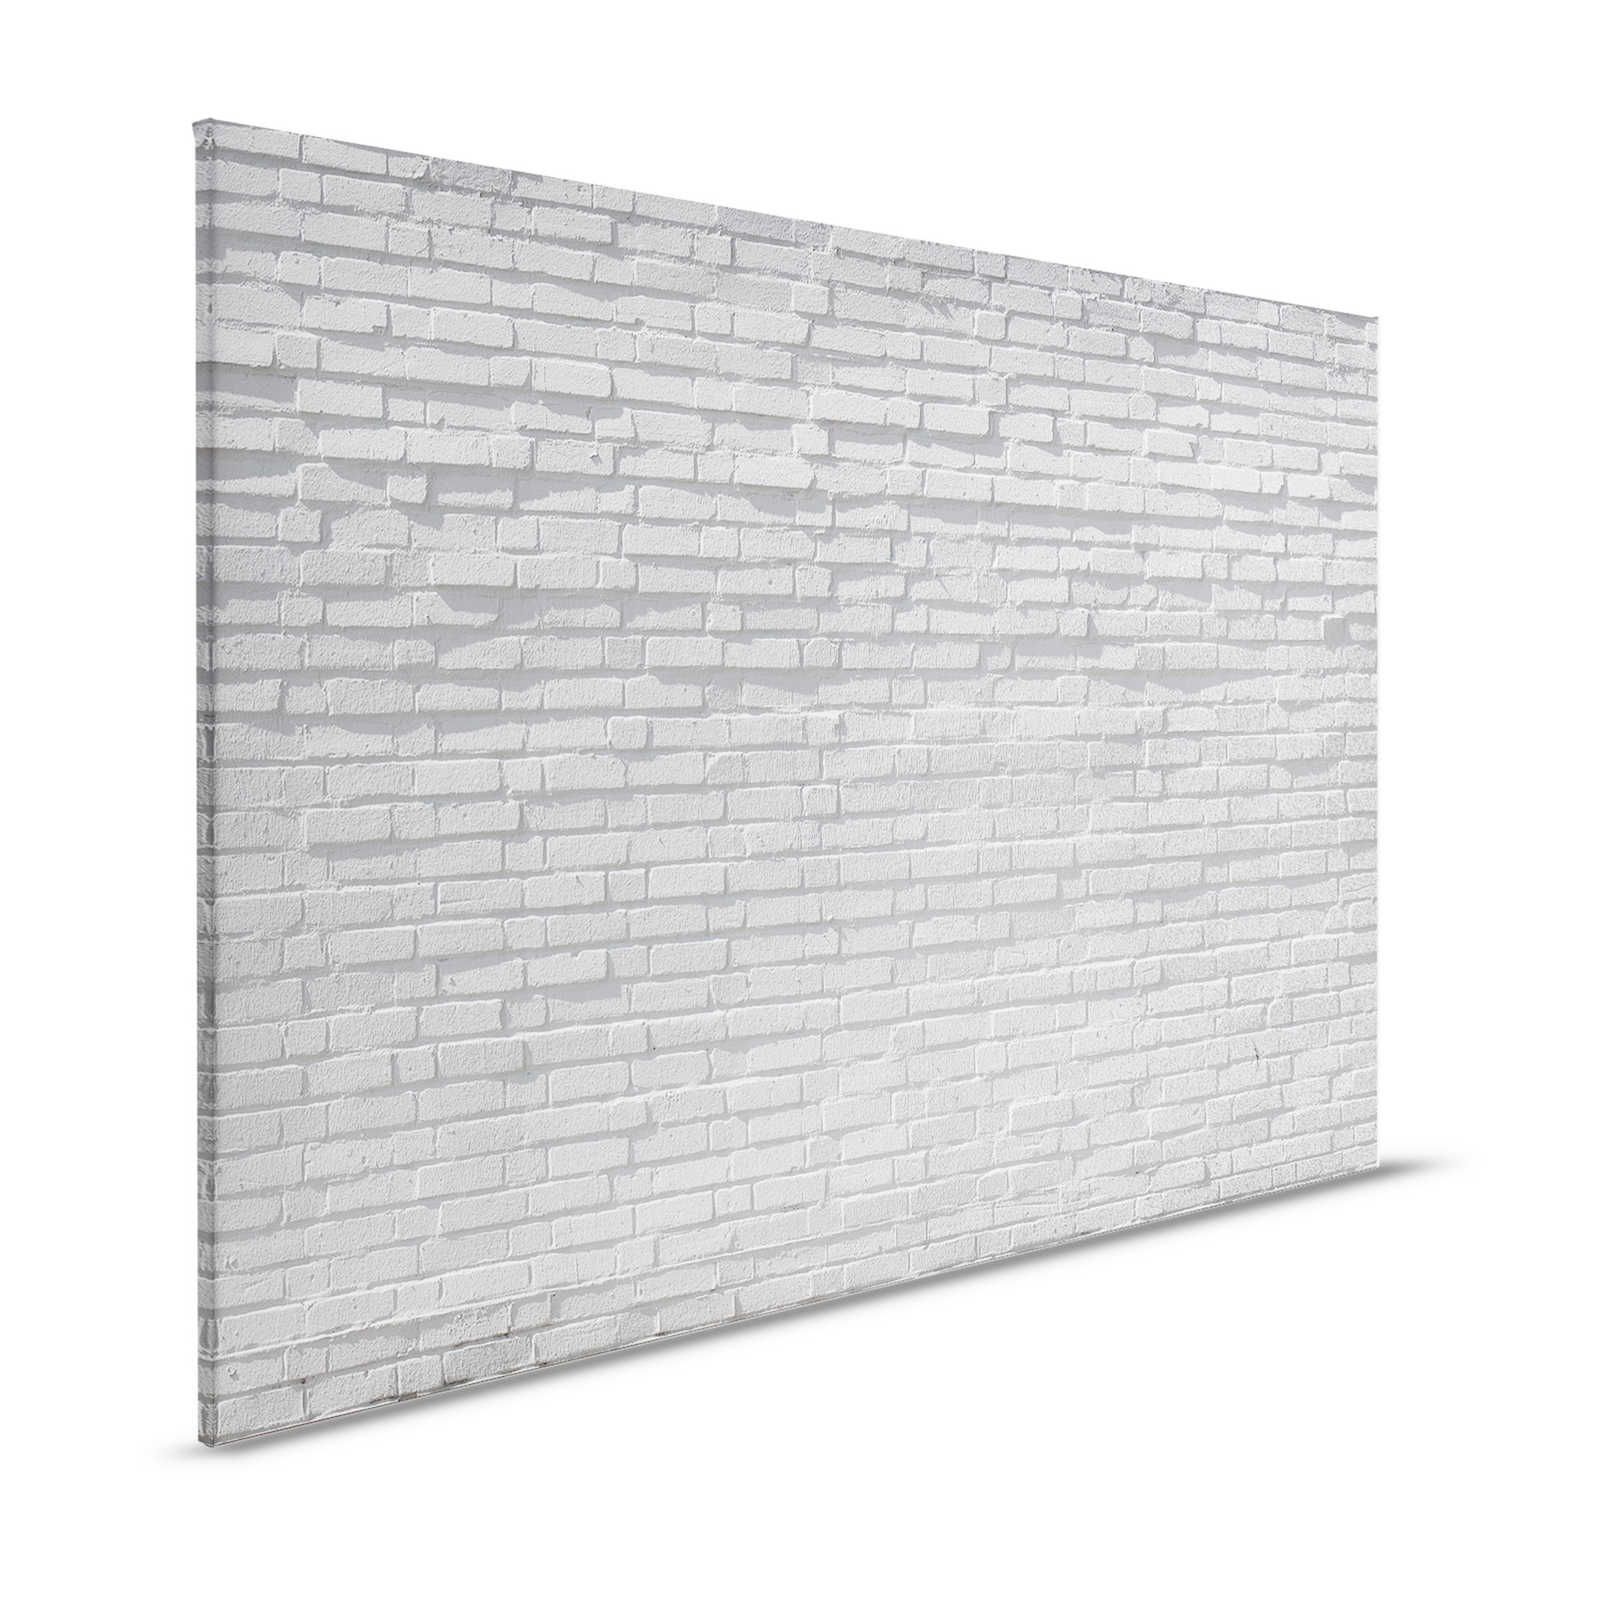 Canvas painting grey brick wall in 3D look - 1,20 m x 0,80 m
